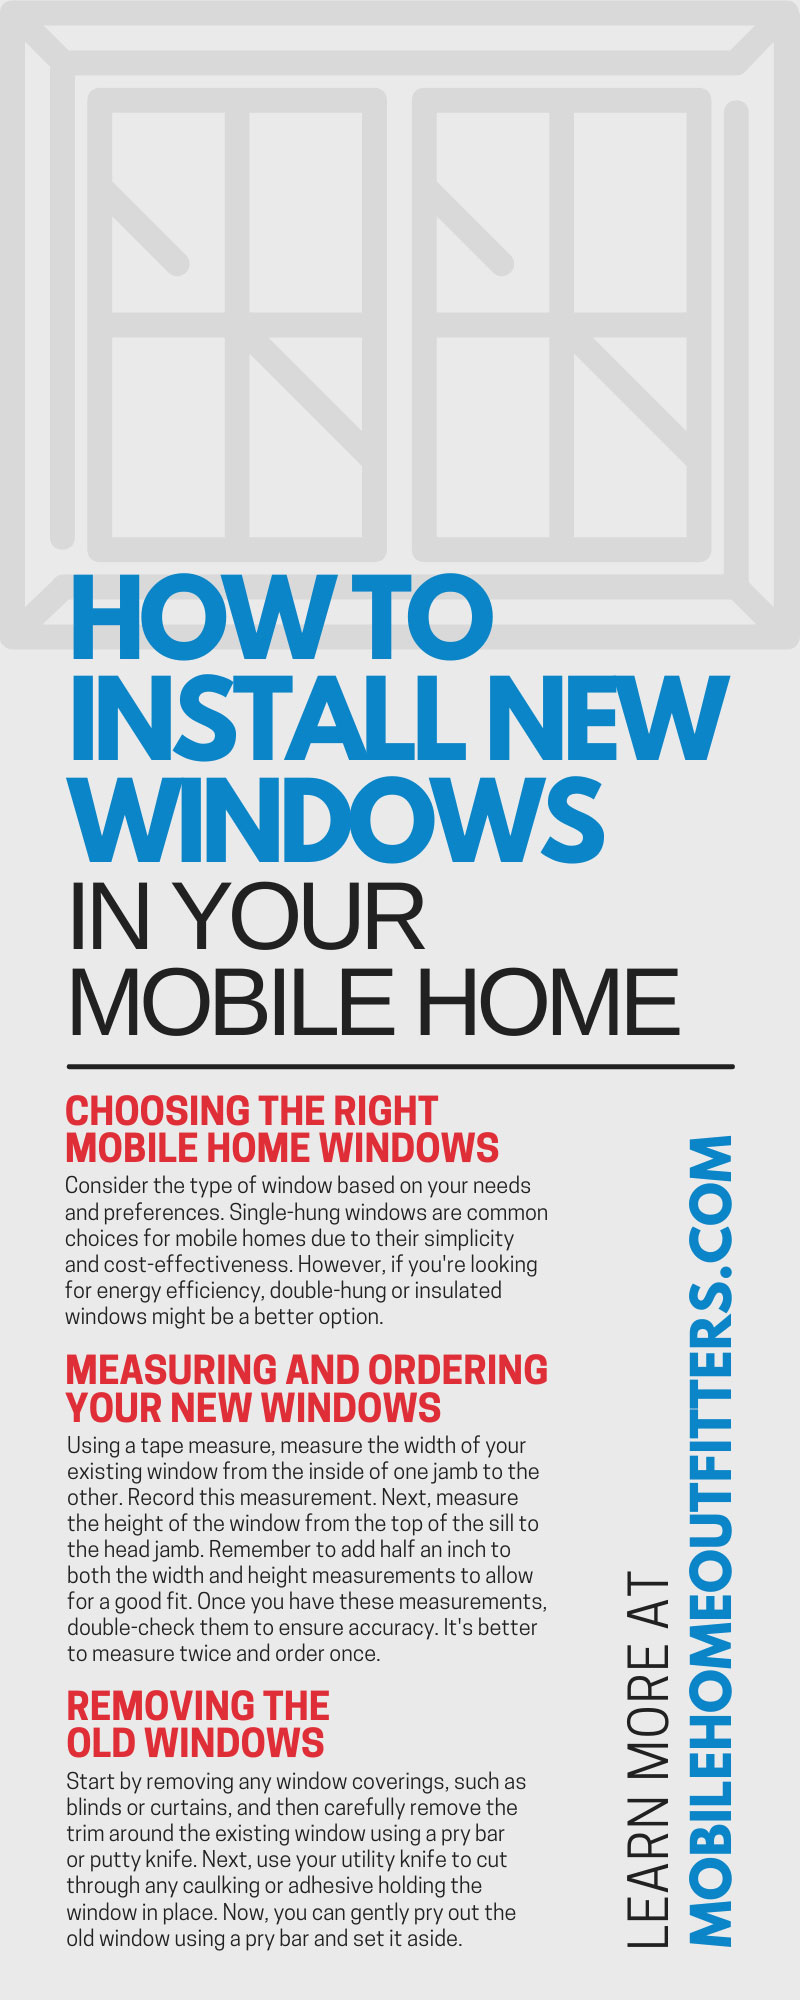 How To Install New Windows in Your Mobile Home